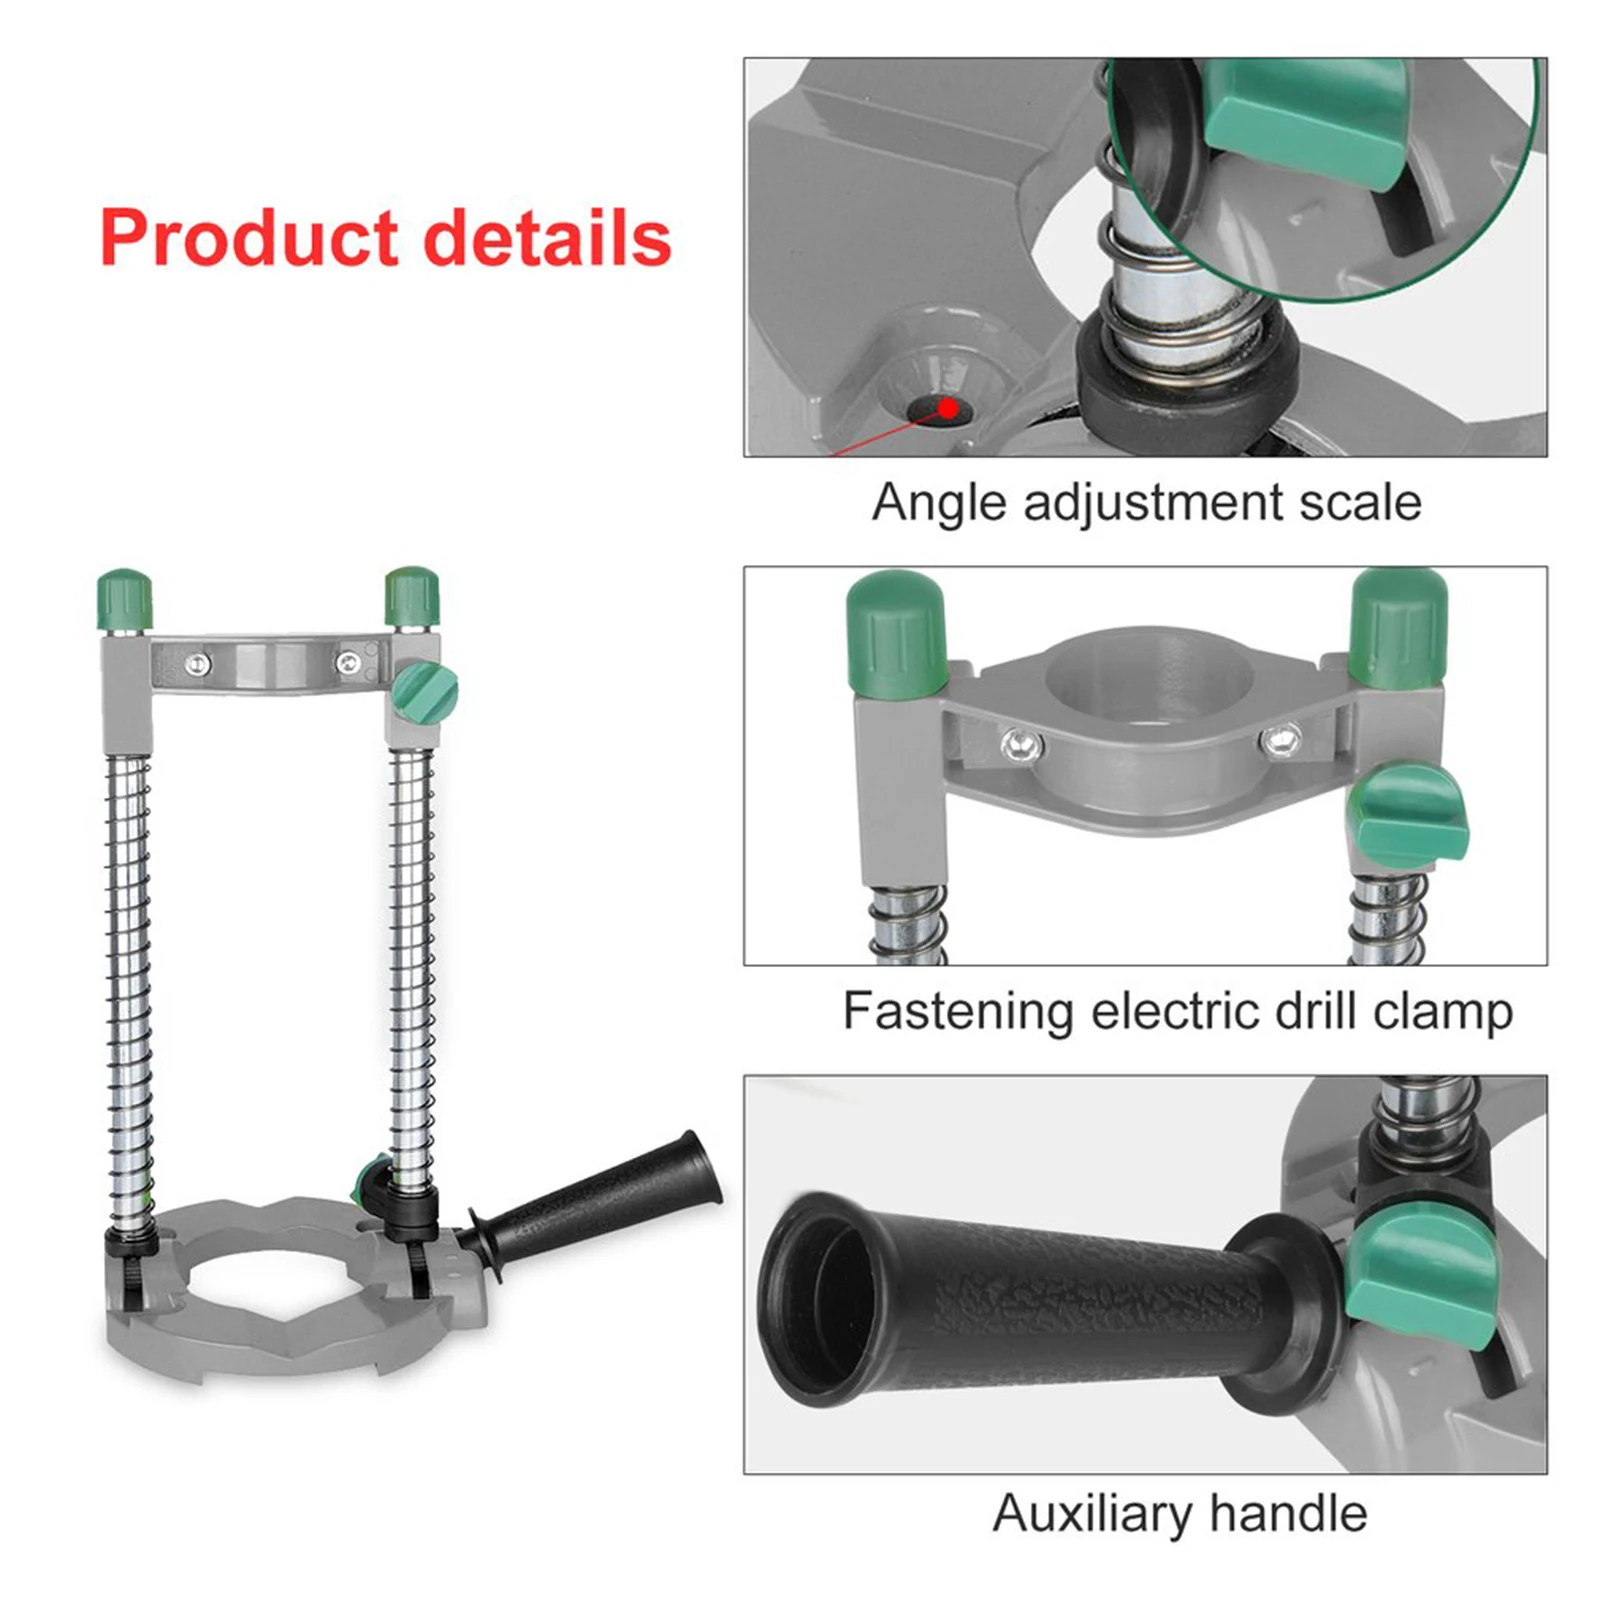 Portable Steel Electric Drill Bracket 45-90 Angle Adjustable Guide Attachment Stand Clamp Work Station Woodworking Utensil